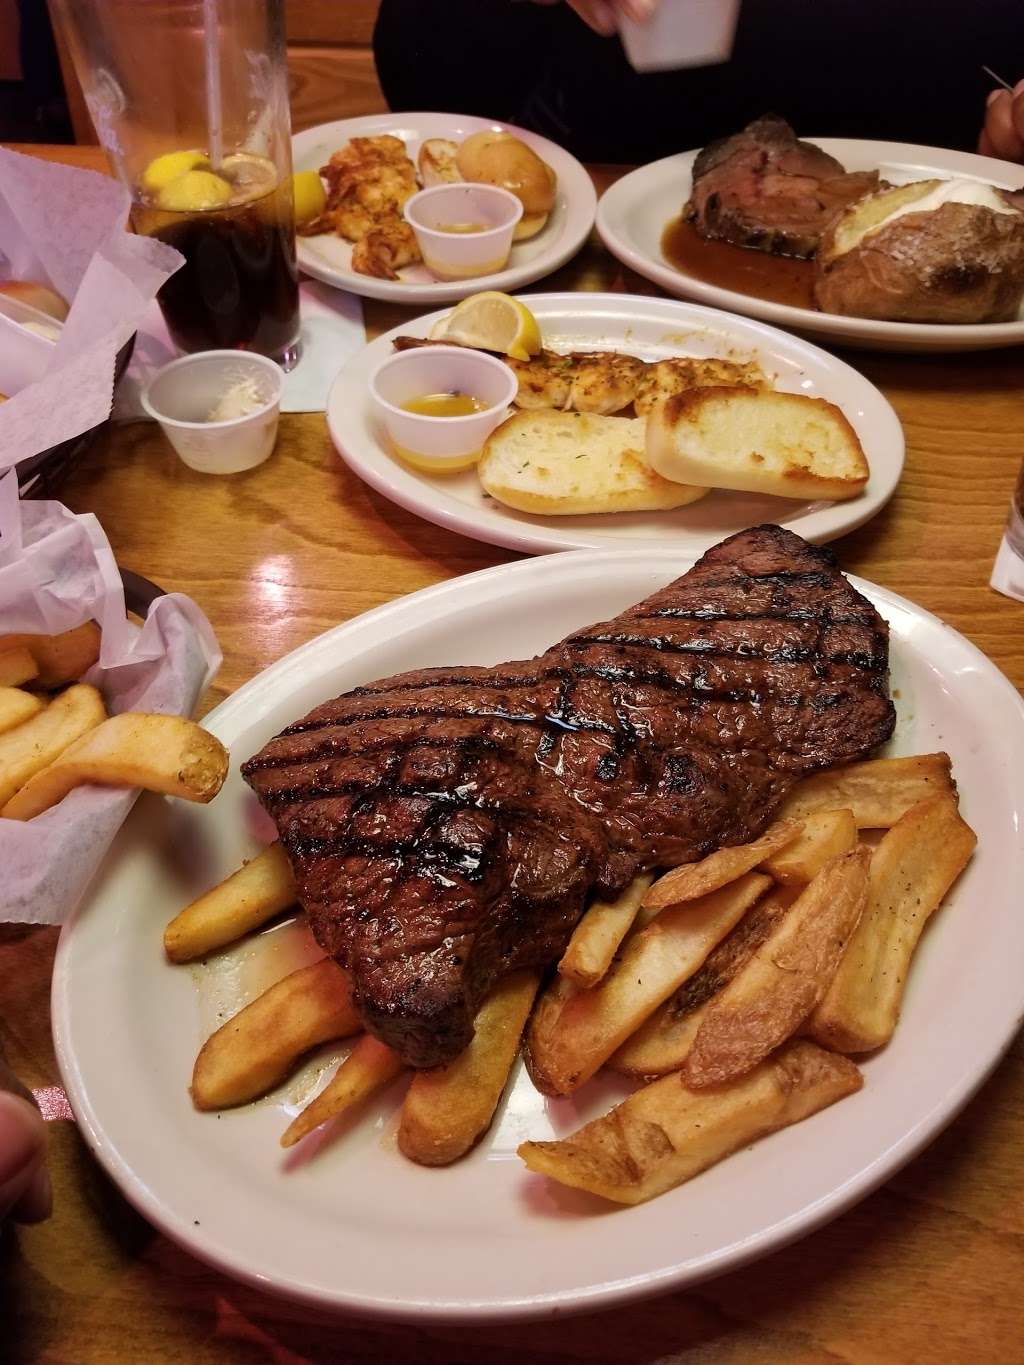 Texas Roadhouse | 8820 Stanford Blvd, Columbia, MD 21045 | Phone: (410) 872-1140